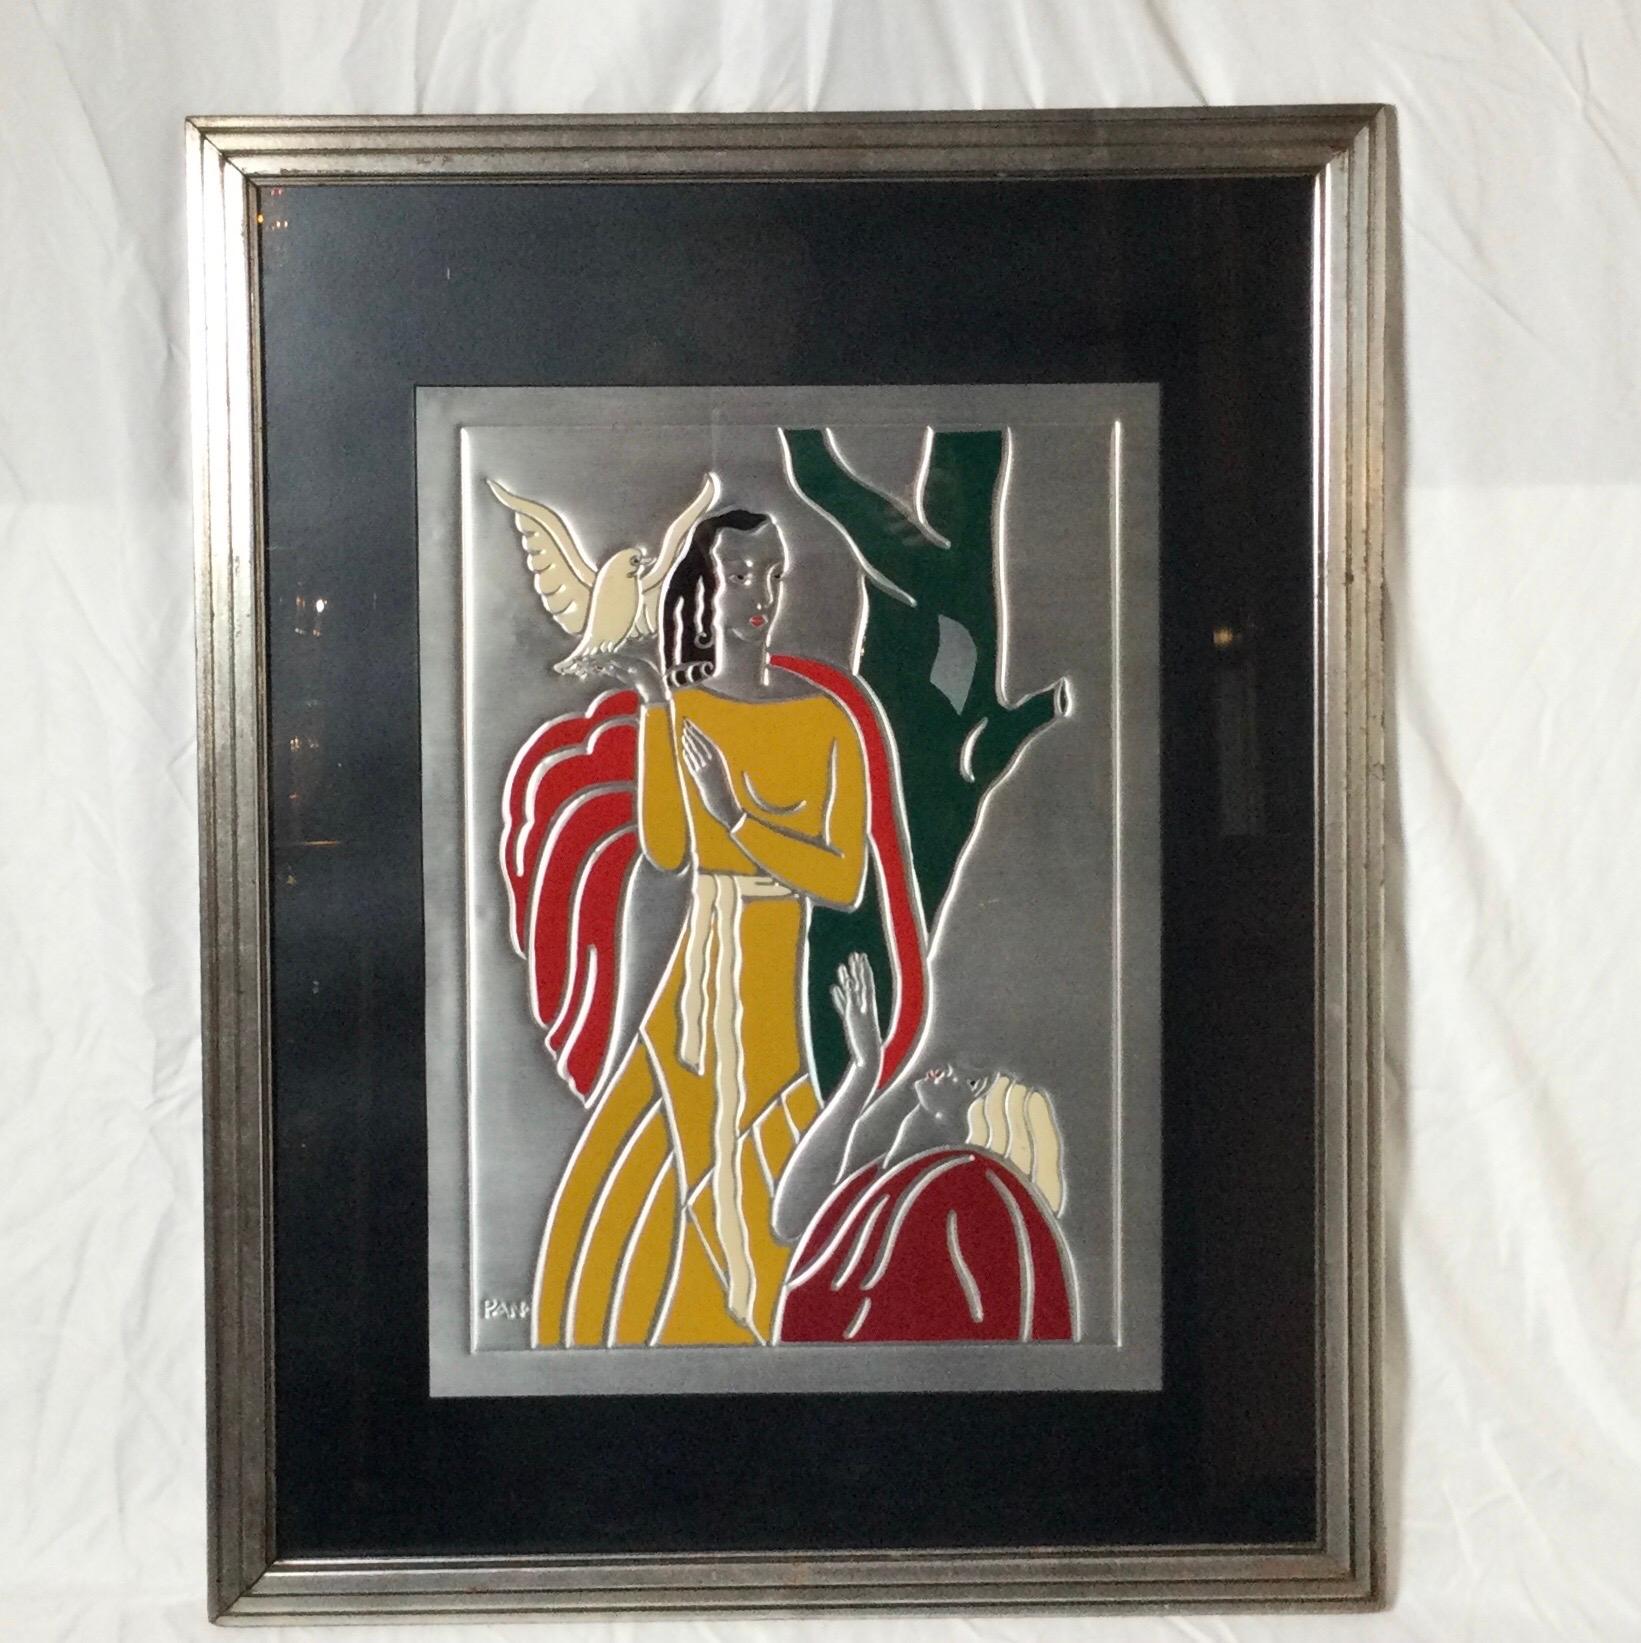 Hand-Painted Pair of Art Deco Period Framed Embossed Metallic Painted Art For Sale